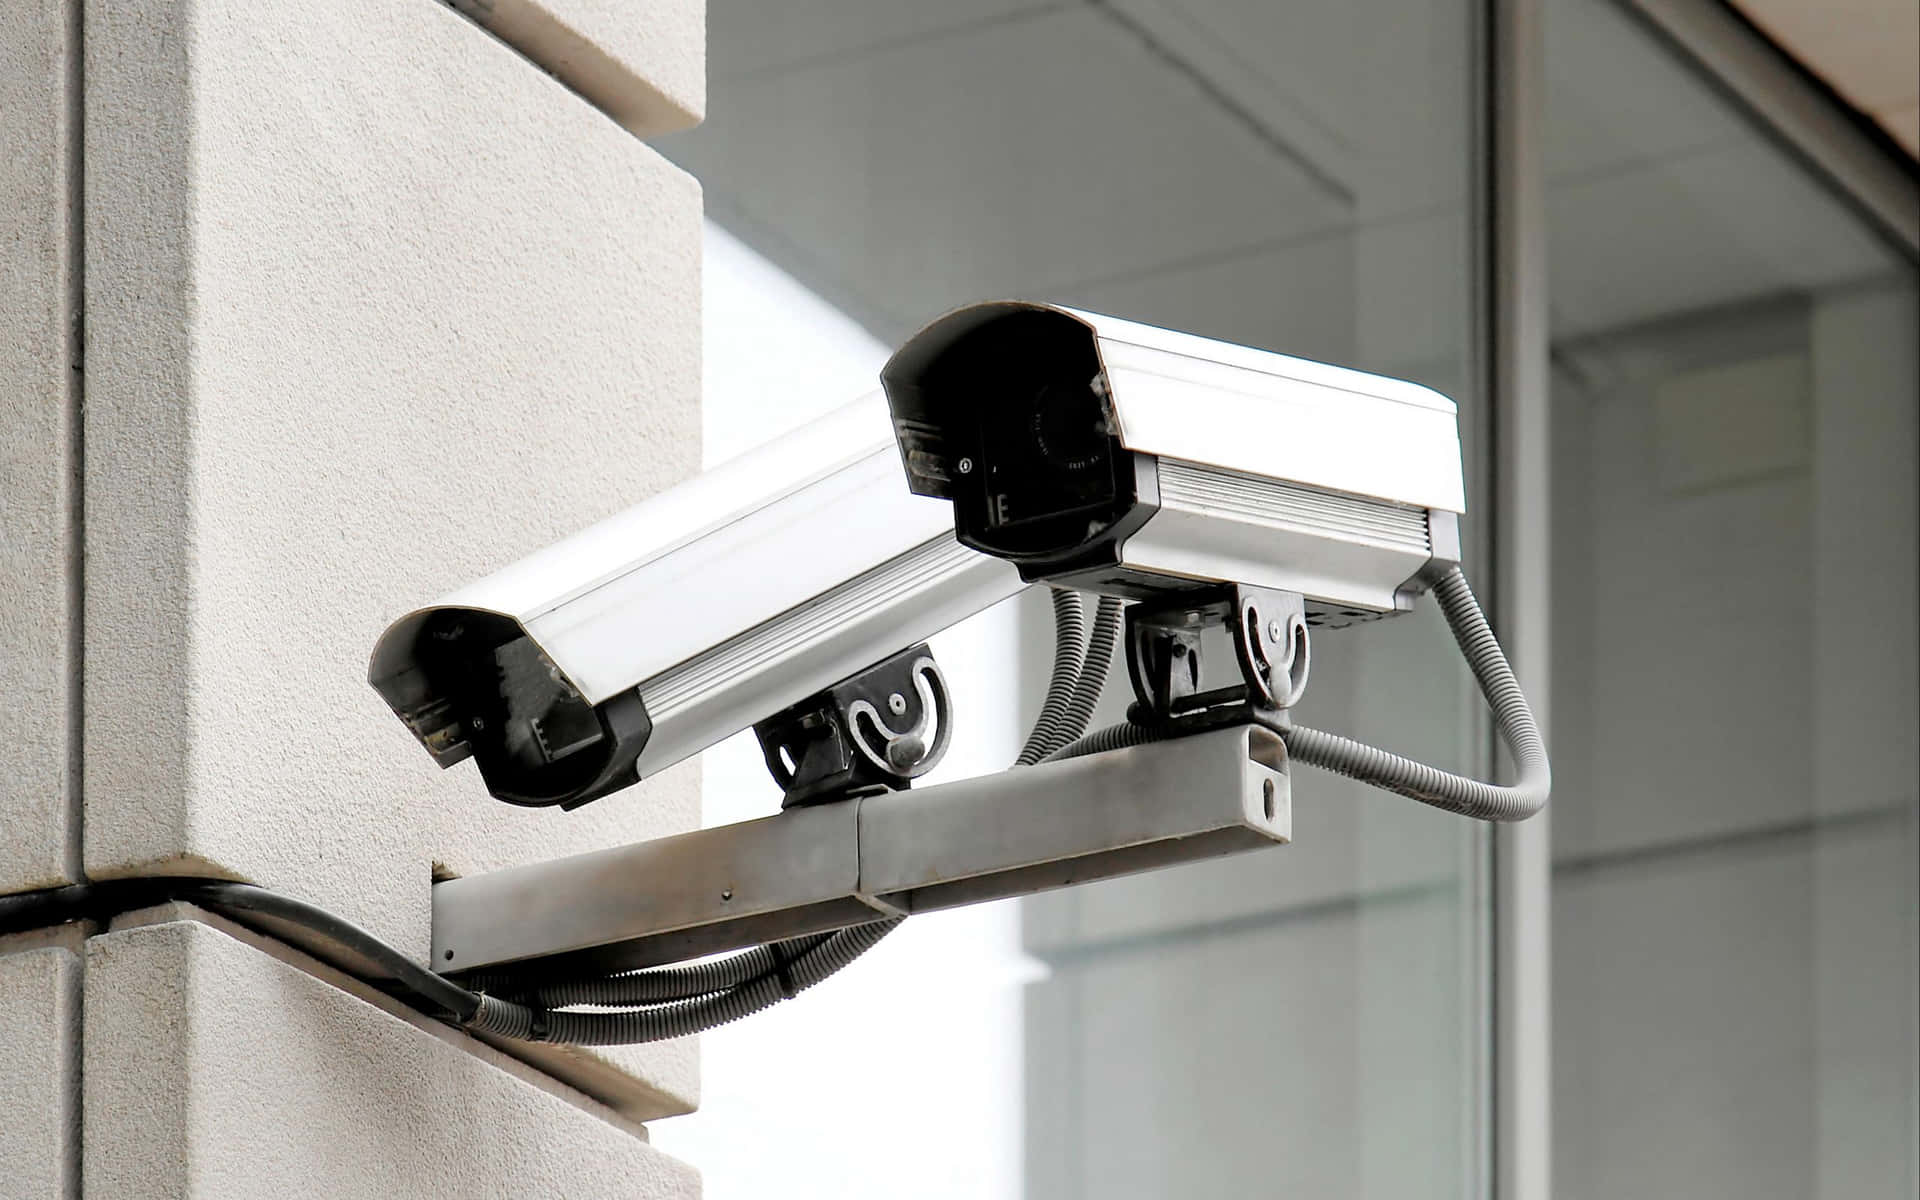 Security Camera Pictures Wallpaper